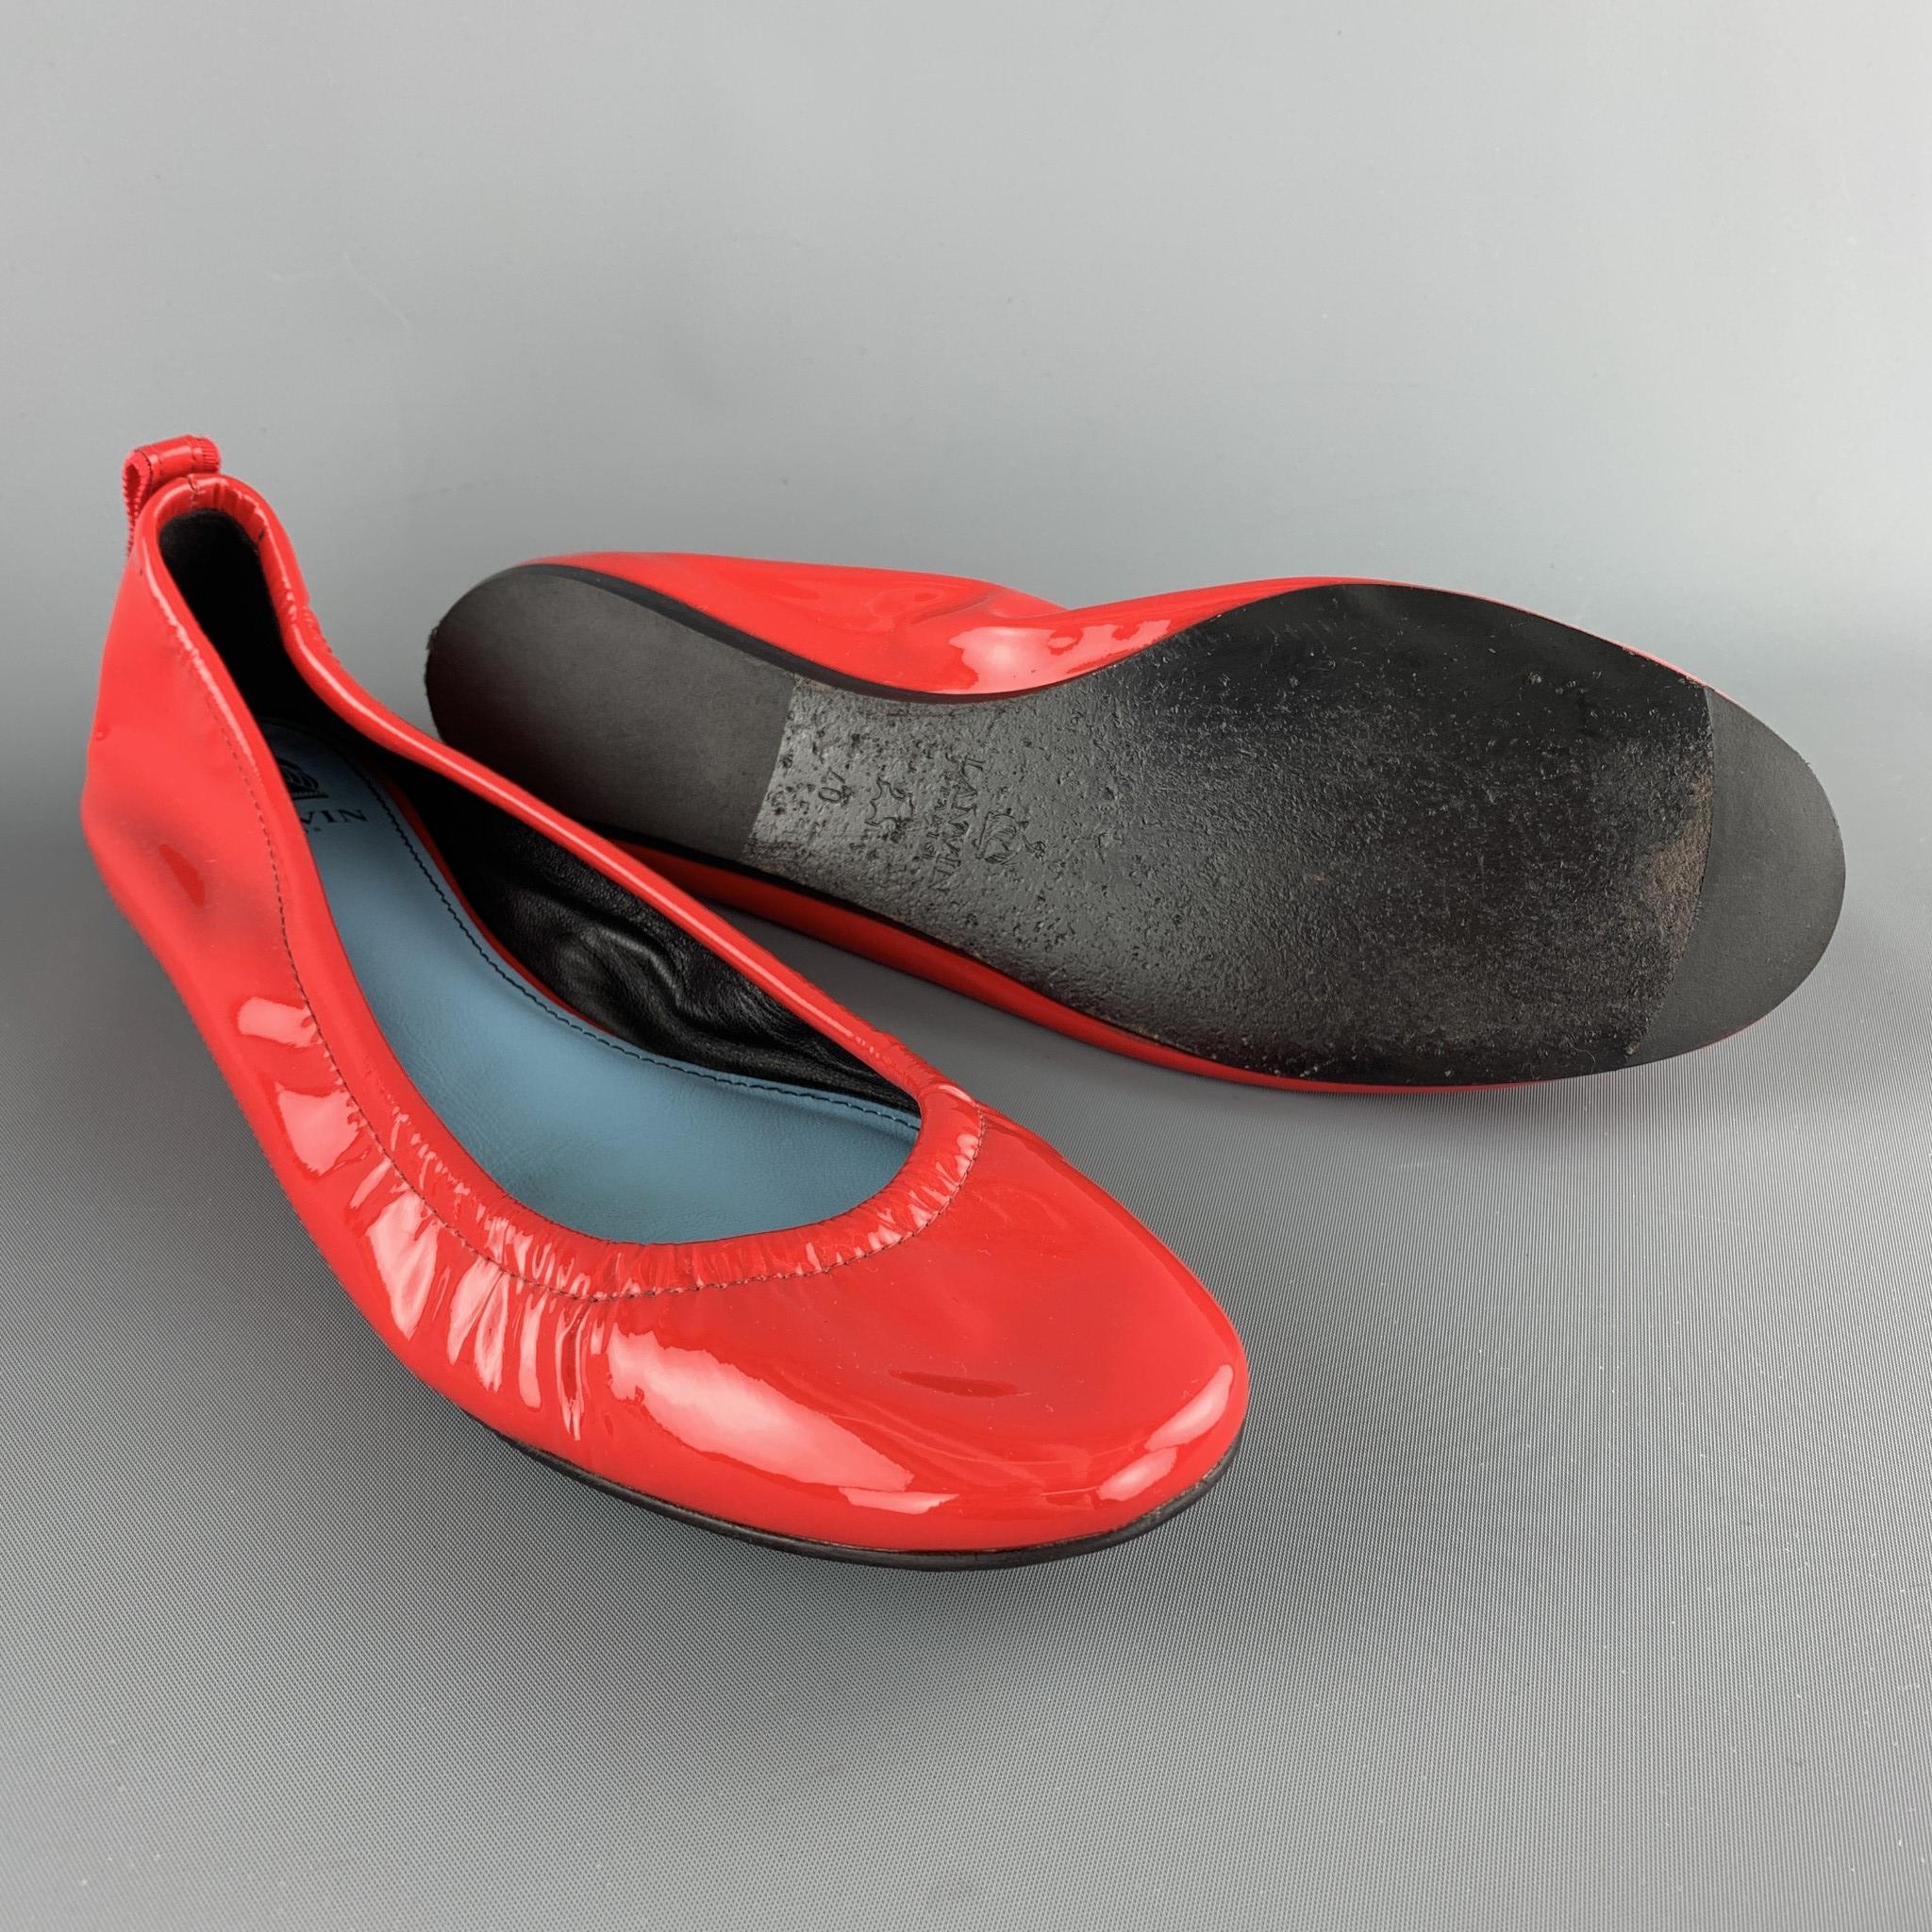 size 10 red flats